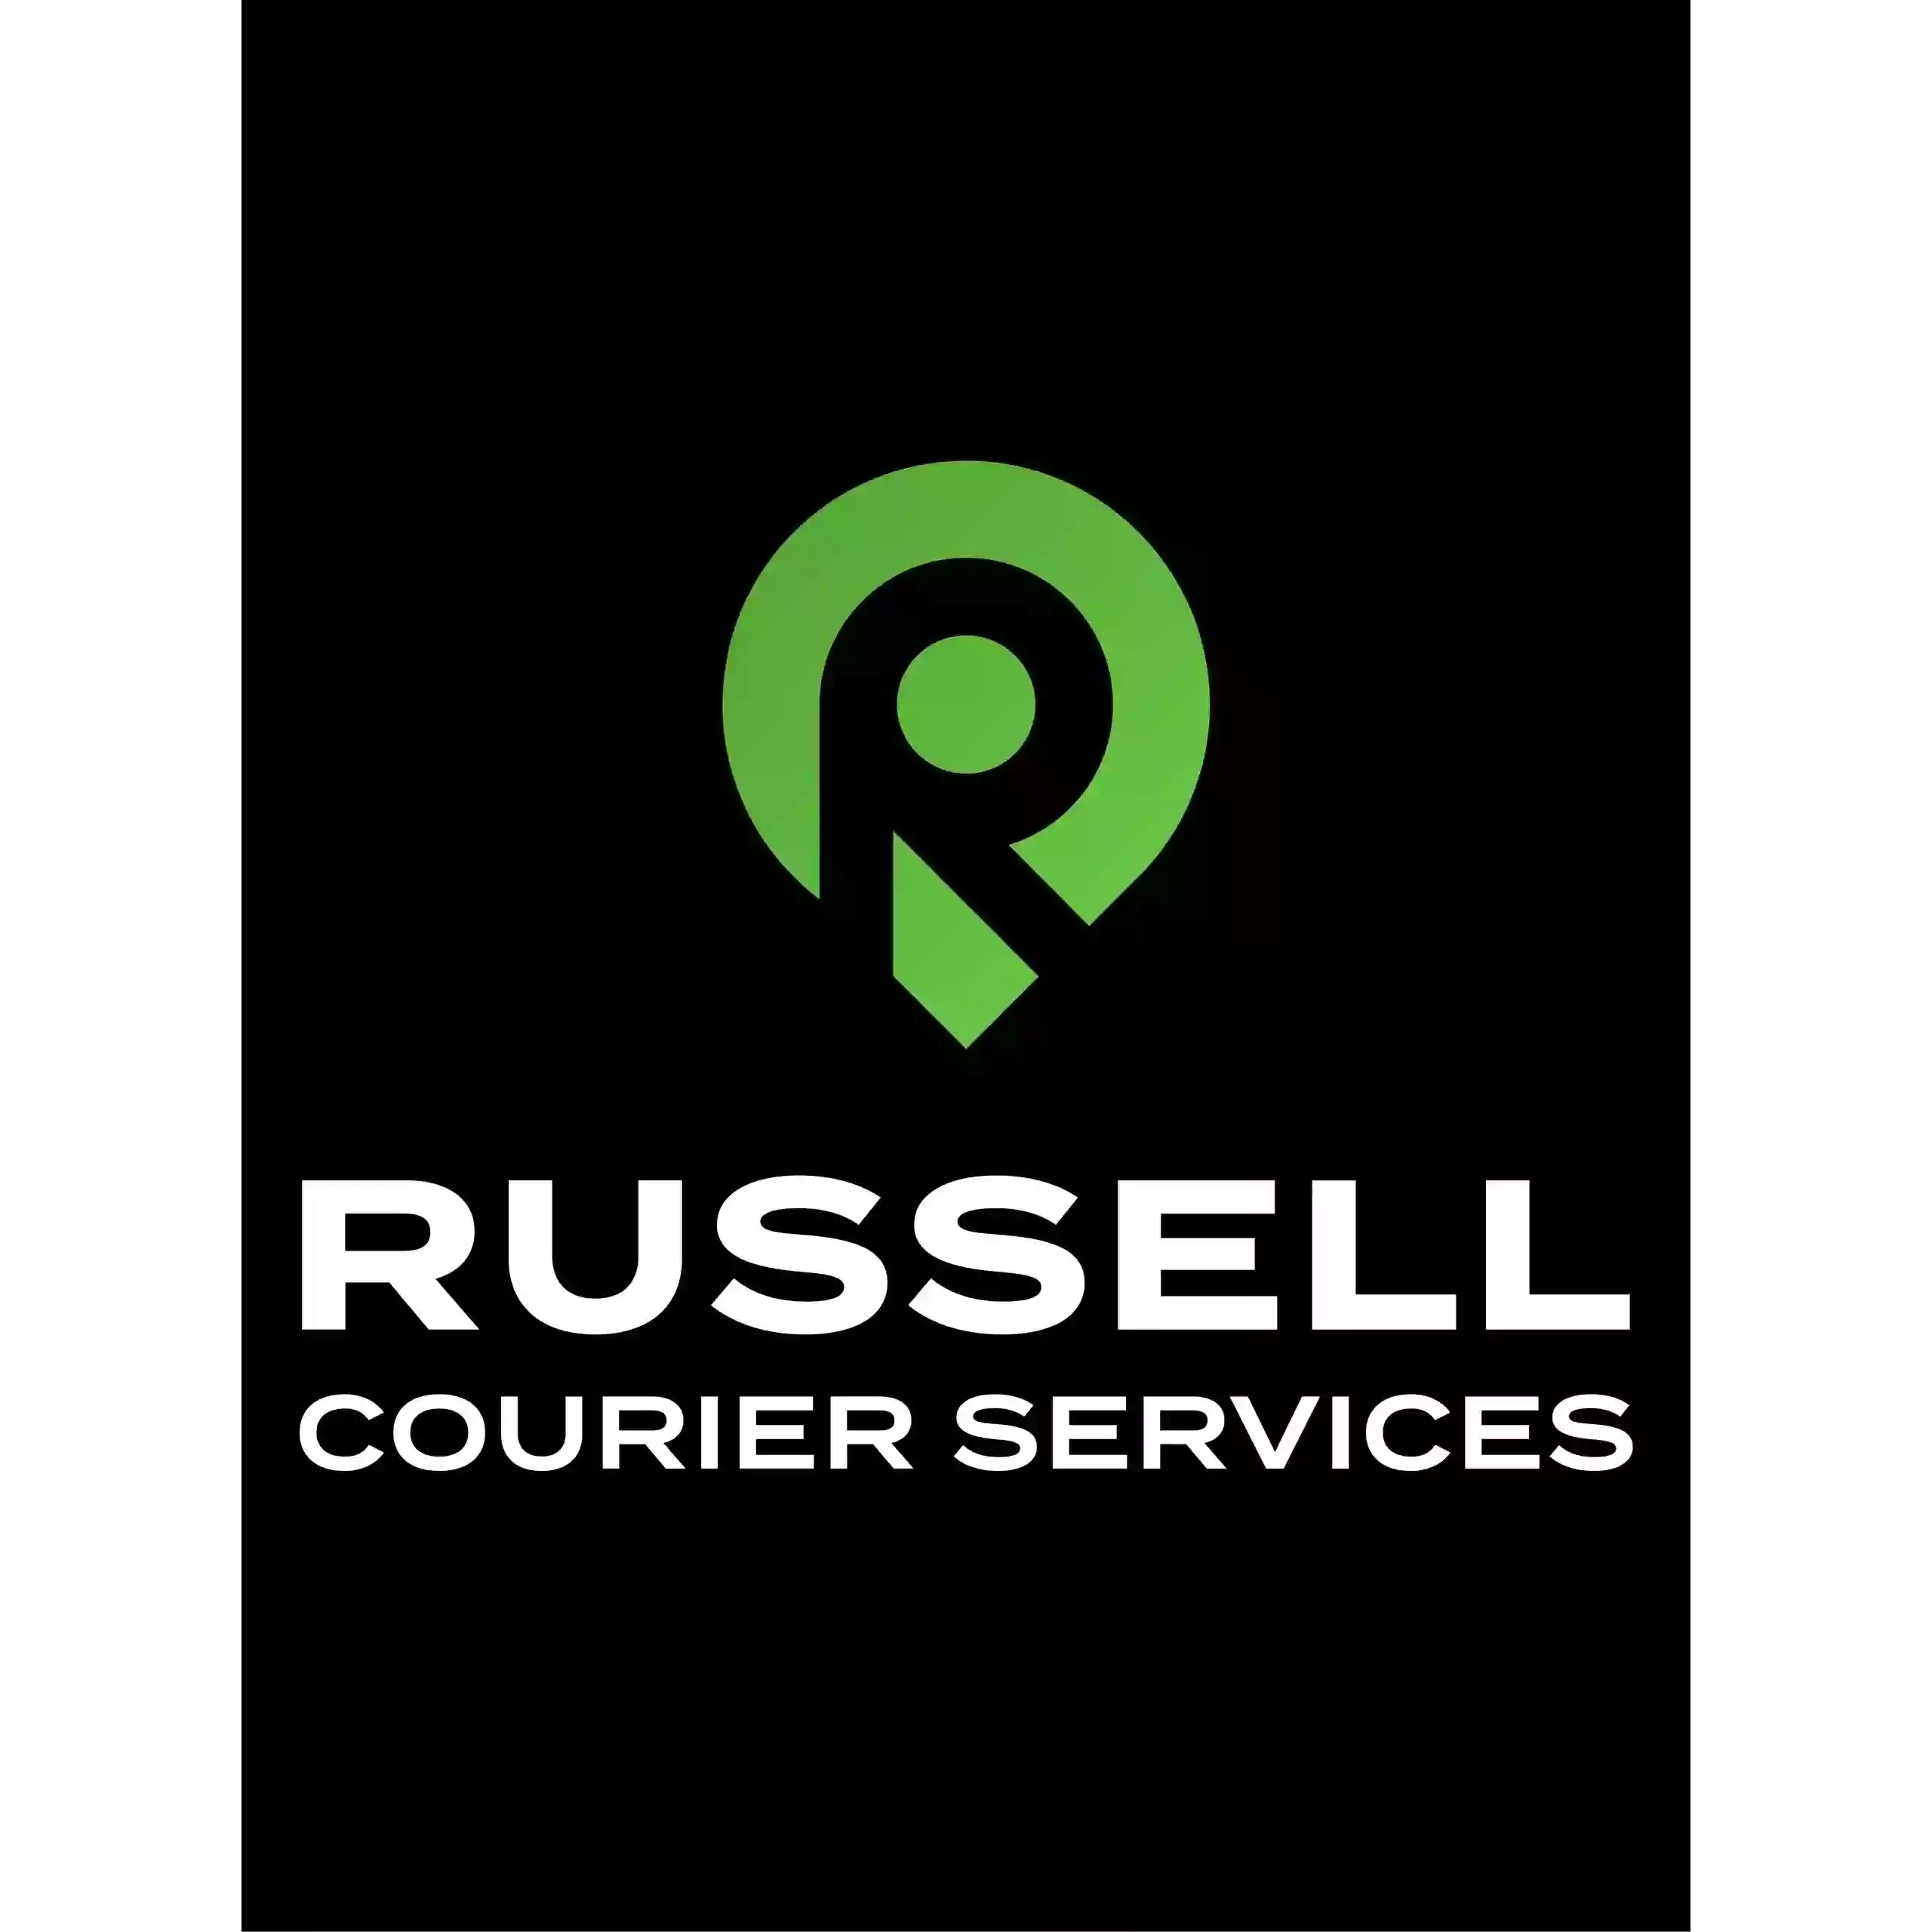 RUSSELL COURIER SERVICES